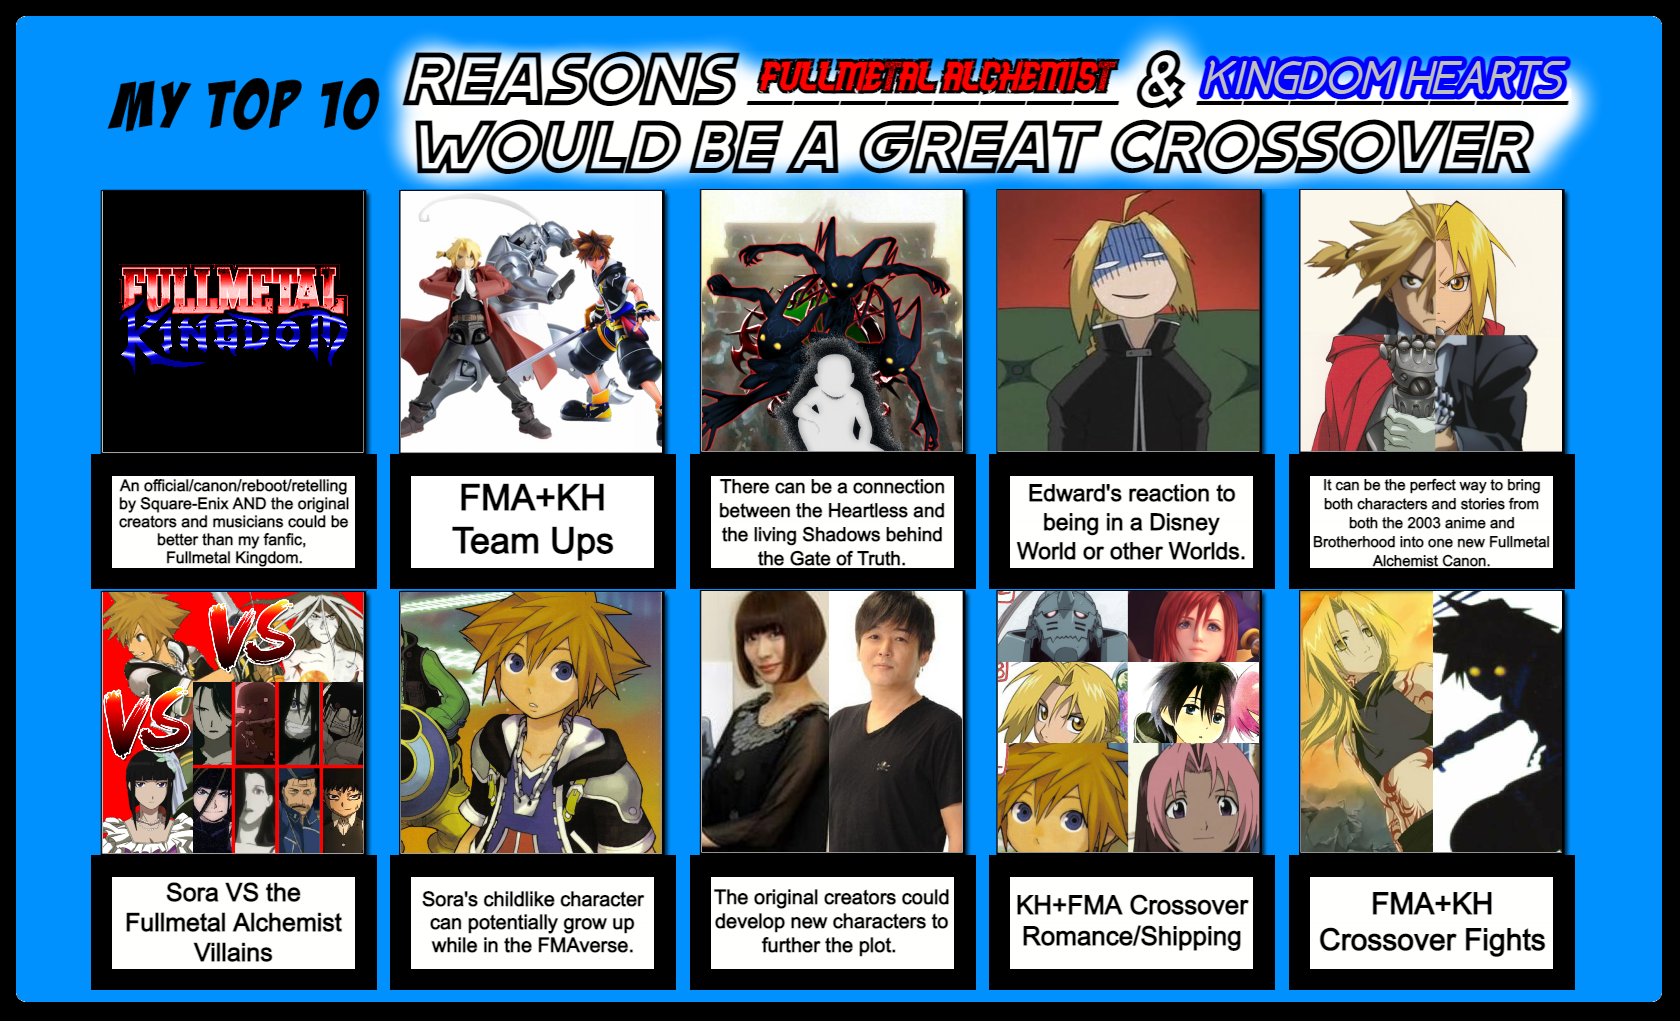 My Top 10 Reasons 4 FMA+KH Crossover by 4xEyes1987 on DeviantArt